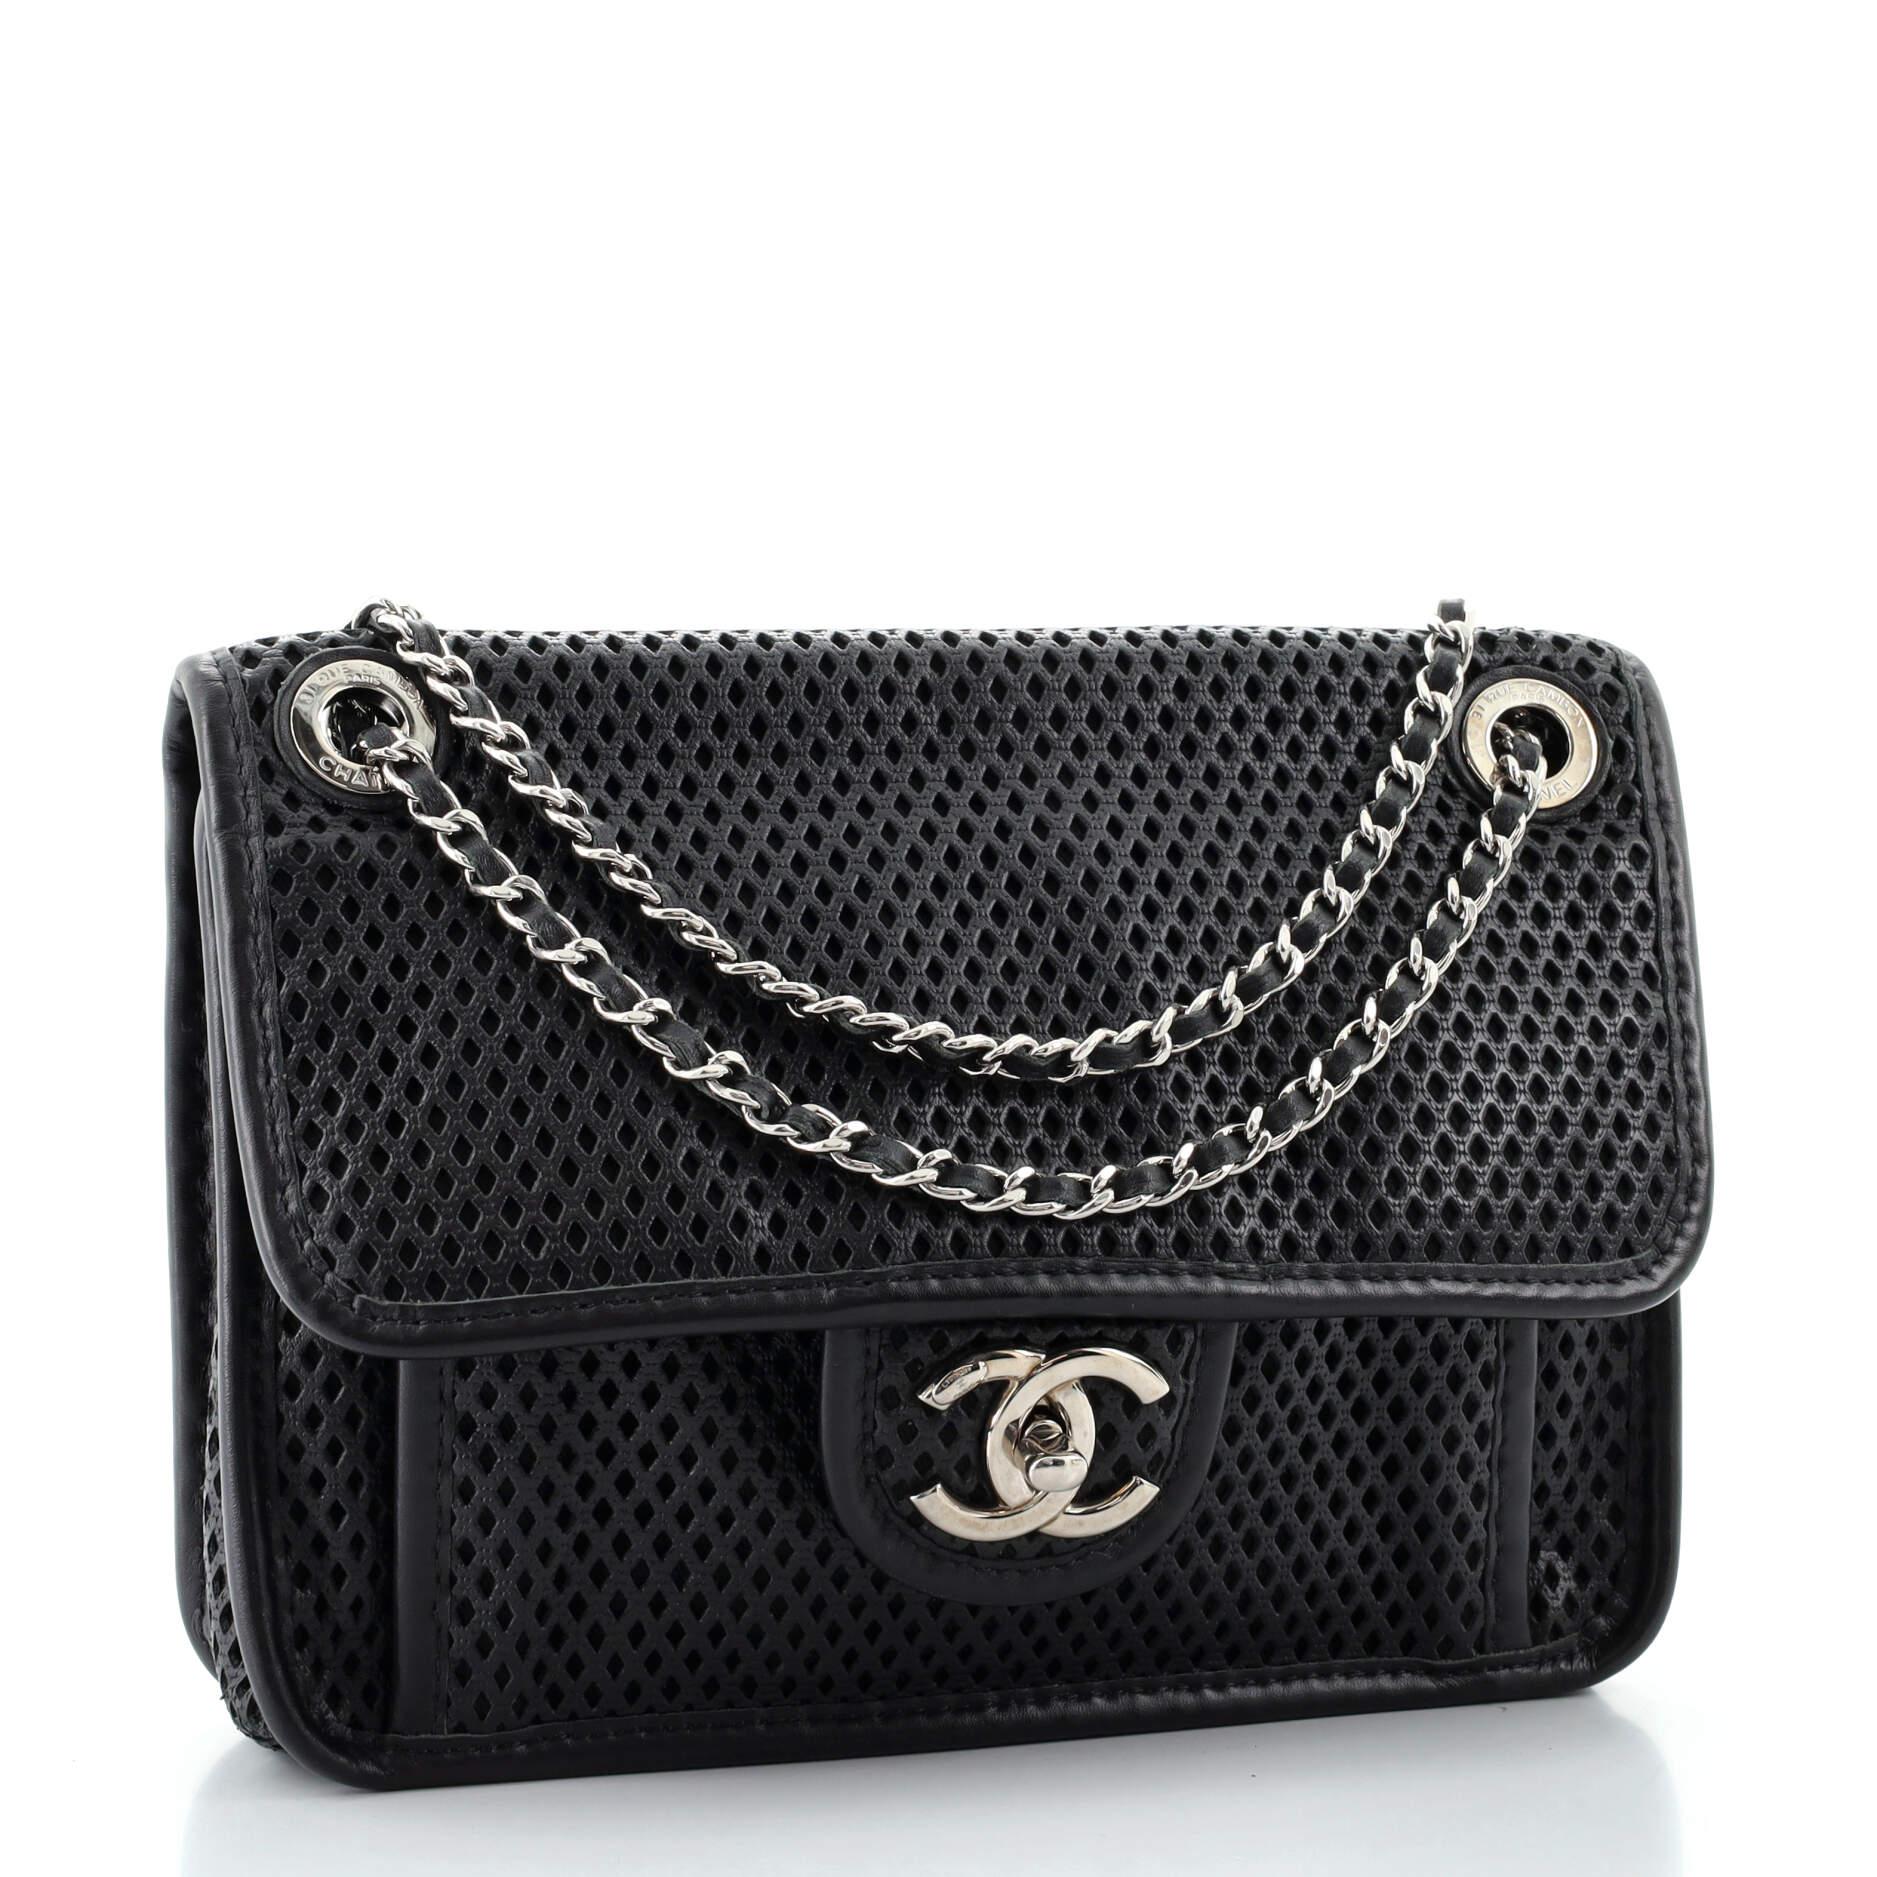 Black Chanel Up In The Air Flap Bag Perforated Leather Small